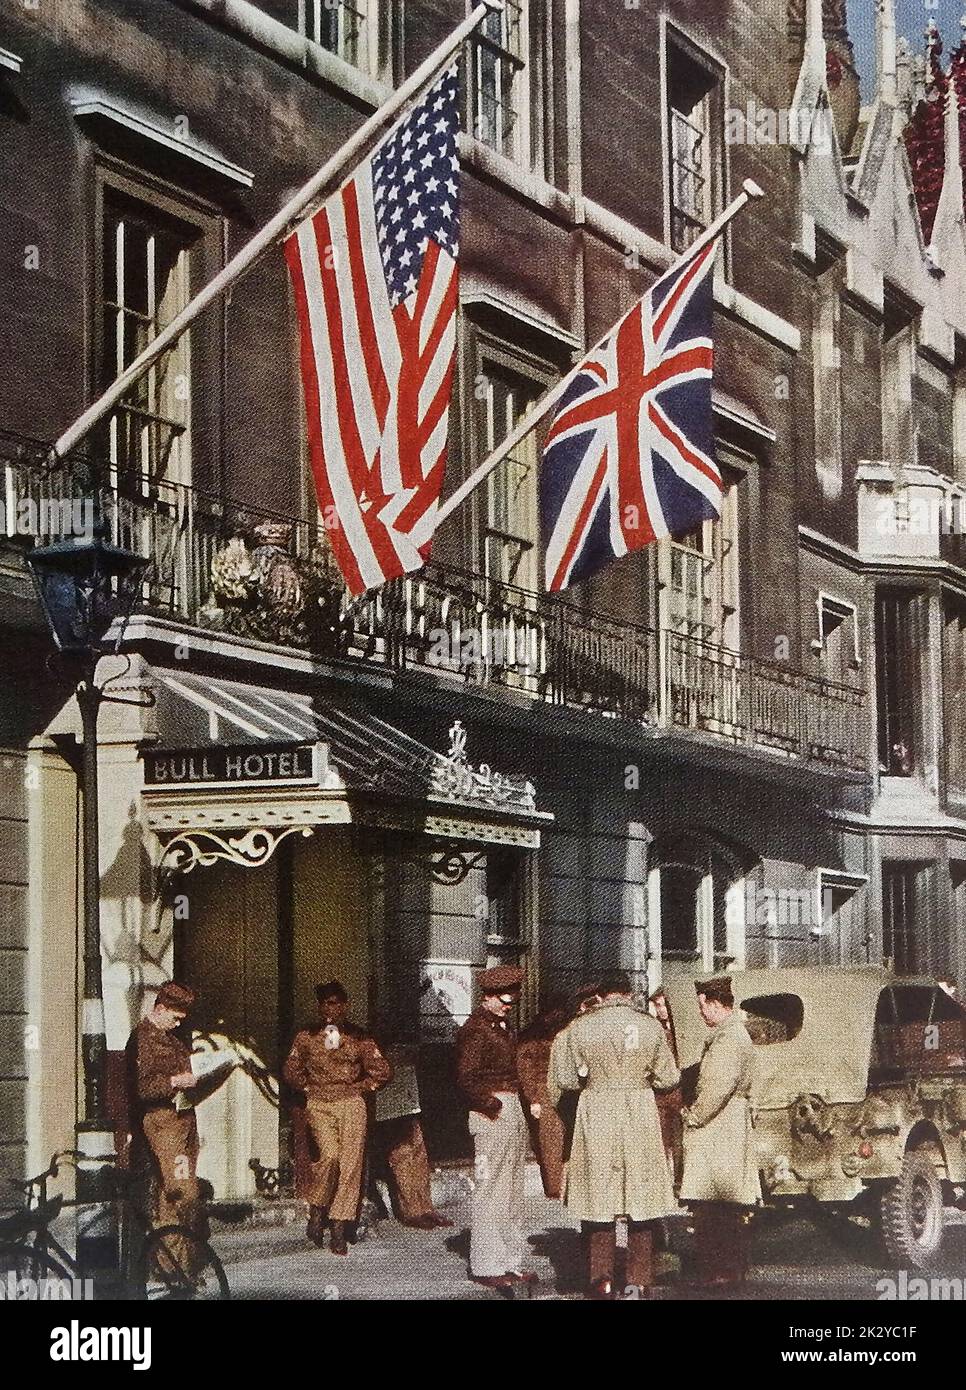 A 1940s colour photo of American servicemen at the Grade II listed Bull Hotel, Cambridge, UK.  The four storey hotel was built in 1828, and occupies the site of a 1th century  inn   known as the Black Bull .  In 1941 the hotel became a centre for American serviceman who instituted the Bull College ,  a branch of the Training Within Civilian Agencies programme of the US Army Stock Photo